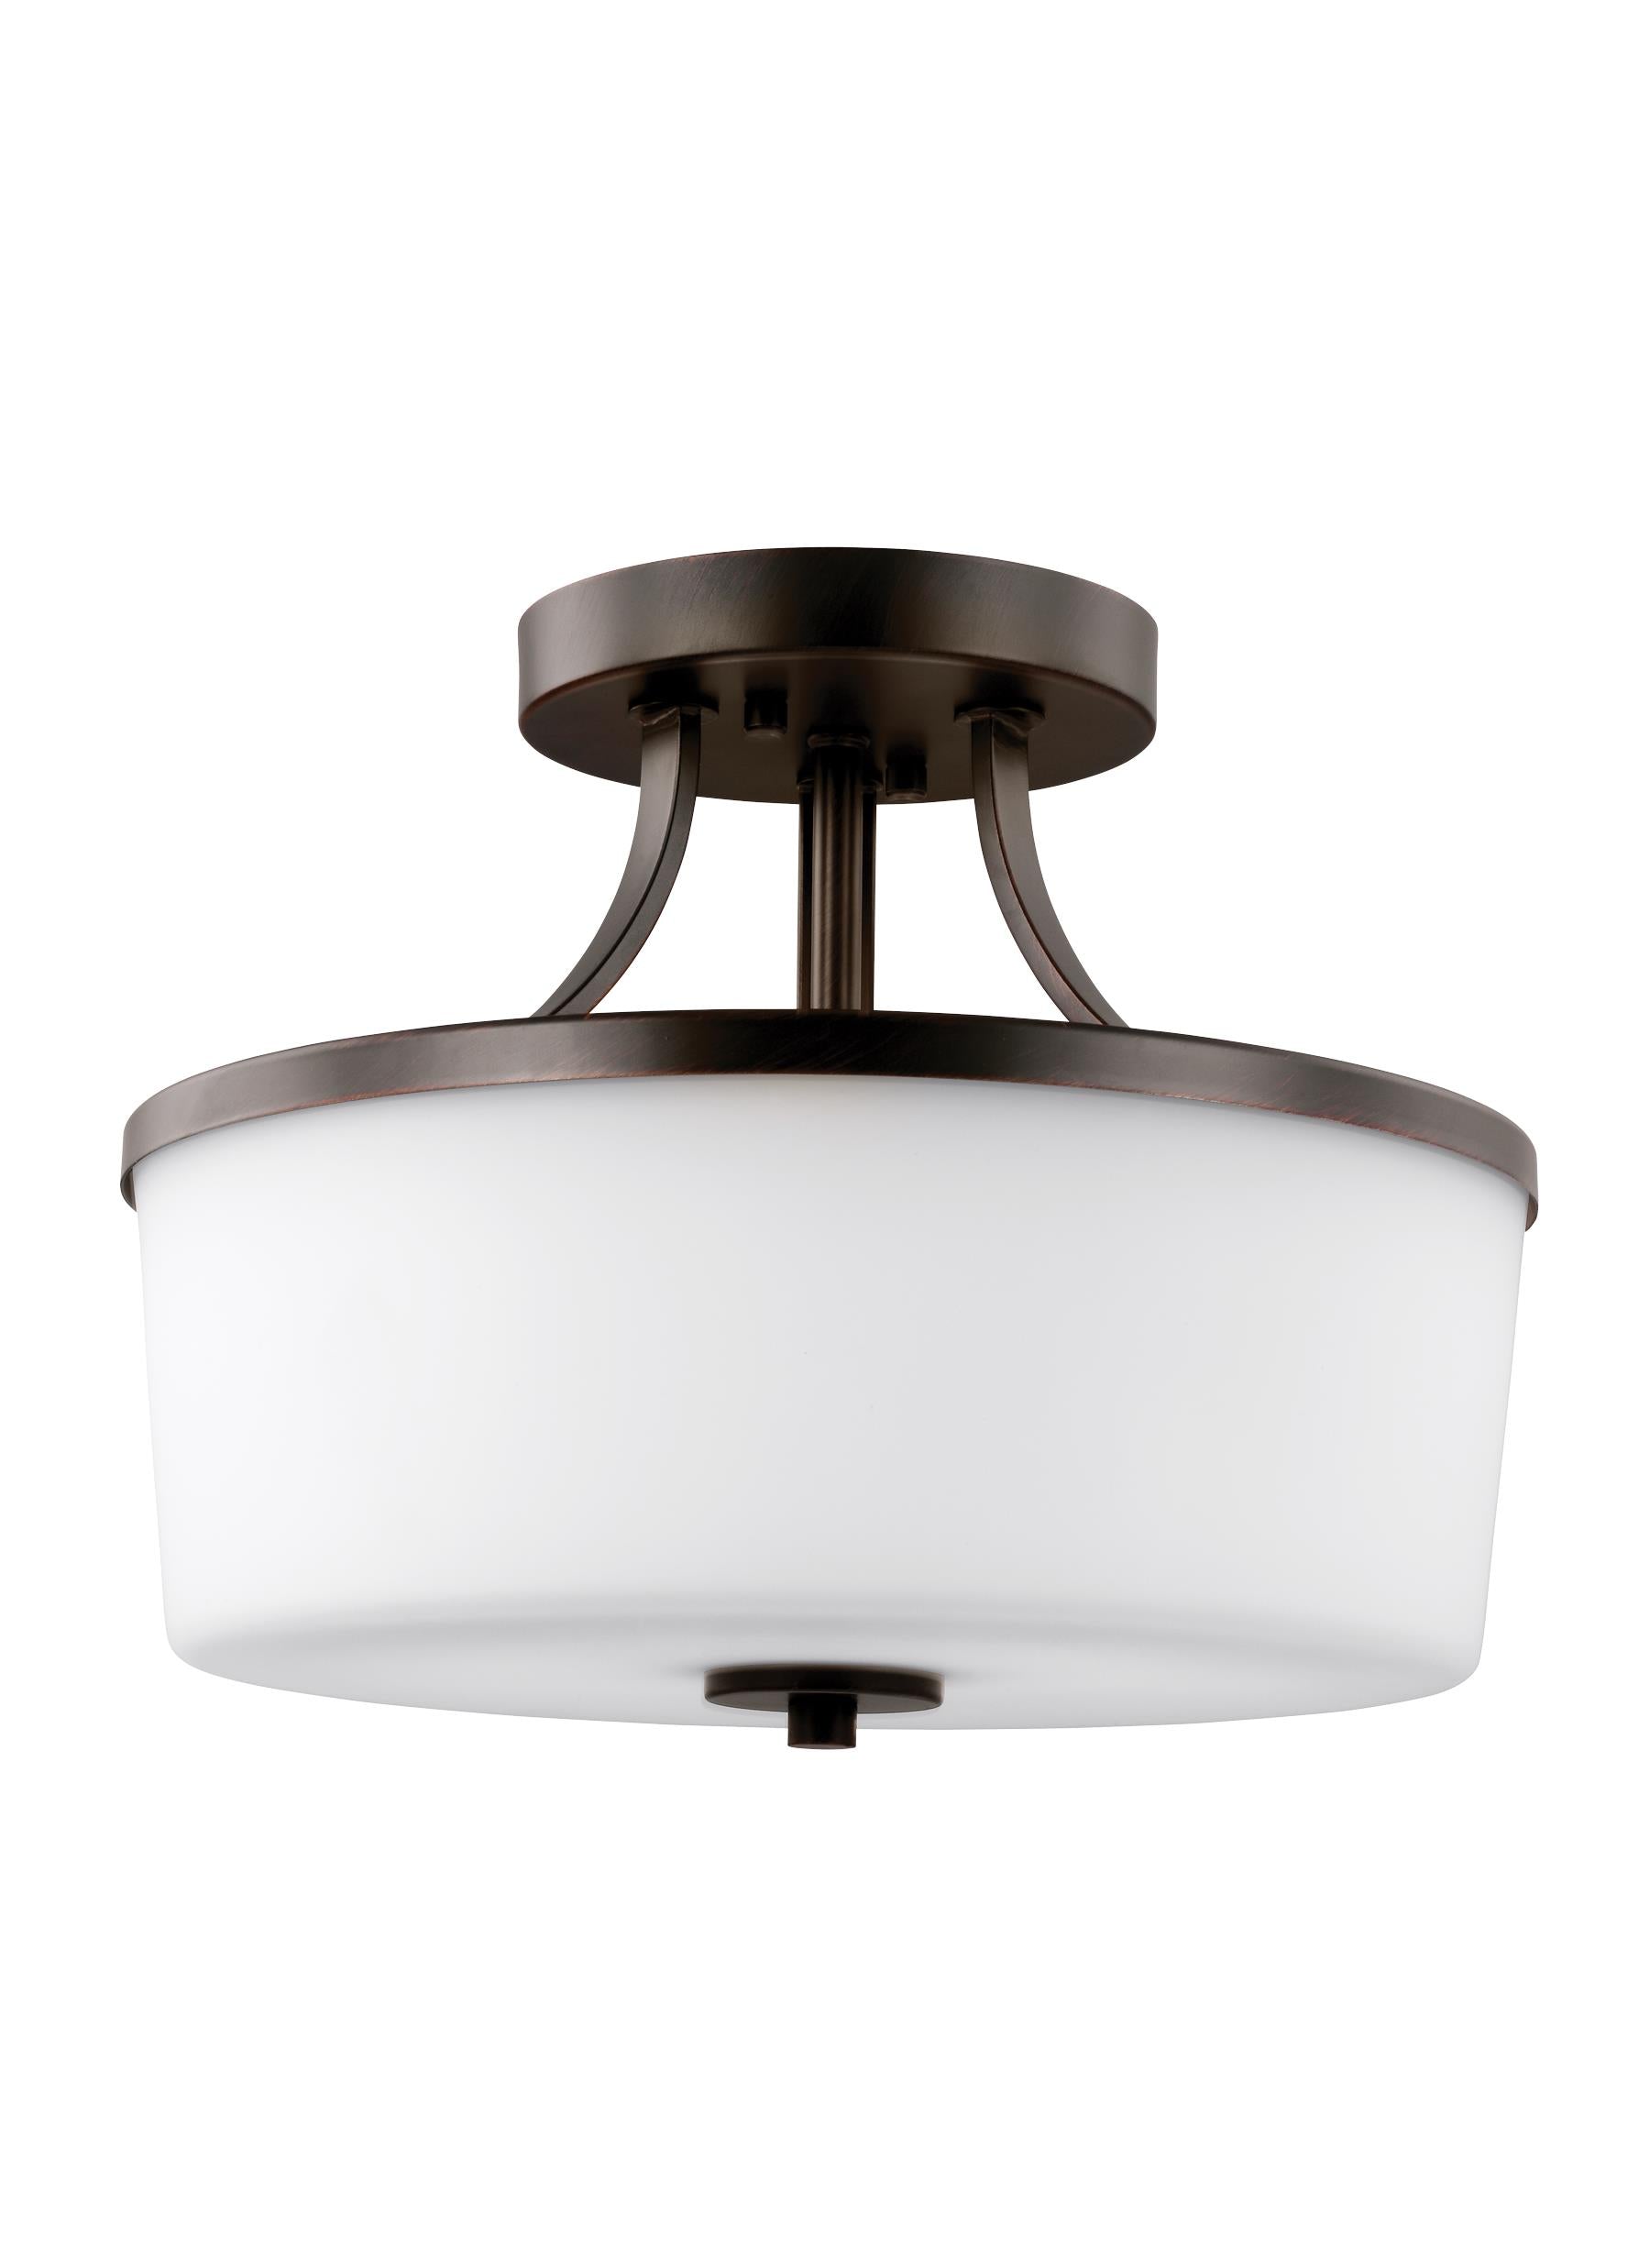 Hettinger transitional 2-light indoor dimmable ceiling flush mount in bronze finish with etched white inside glass shade